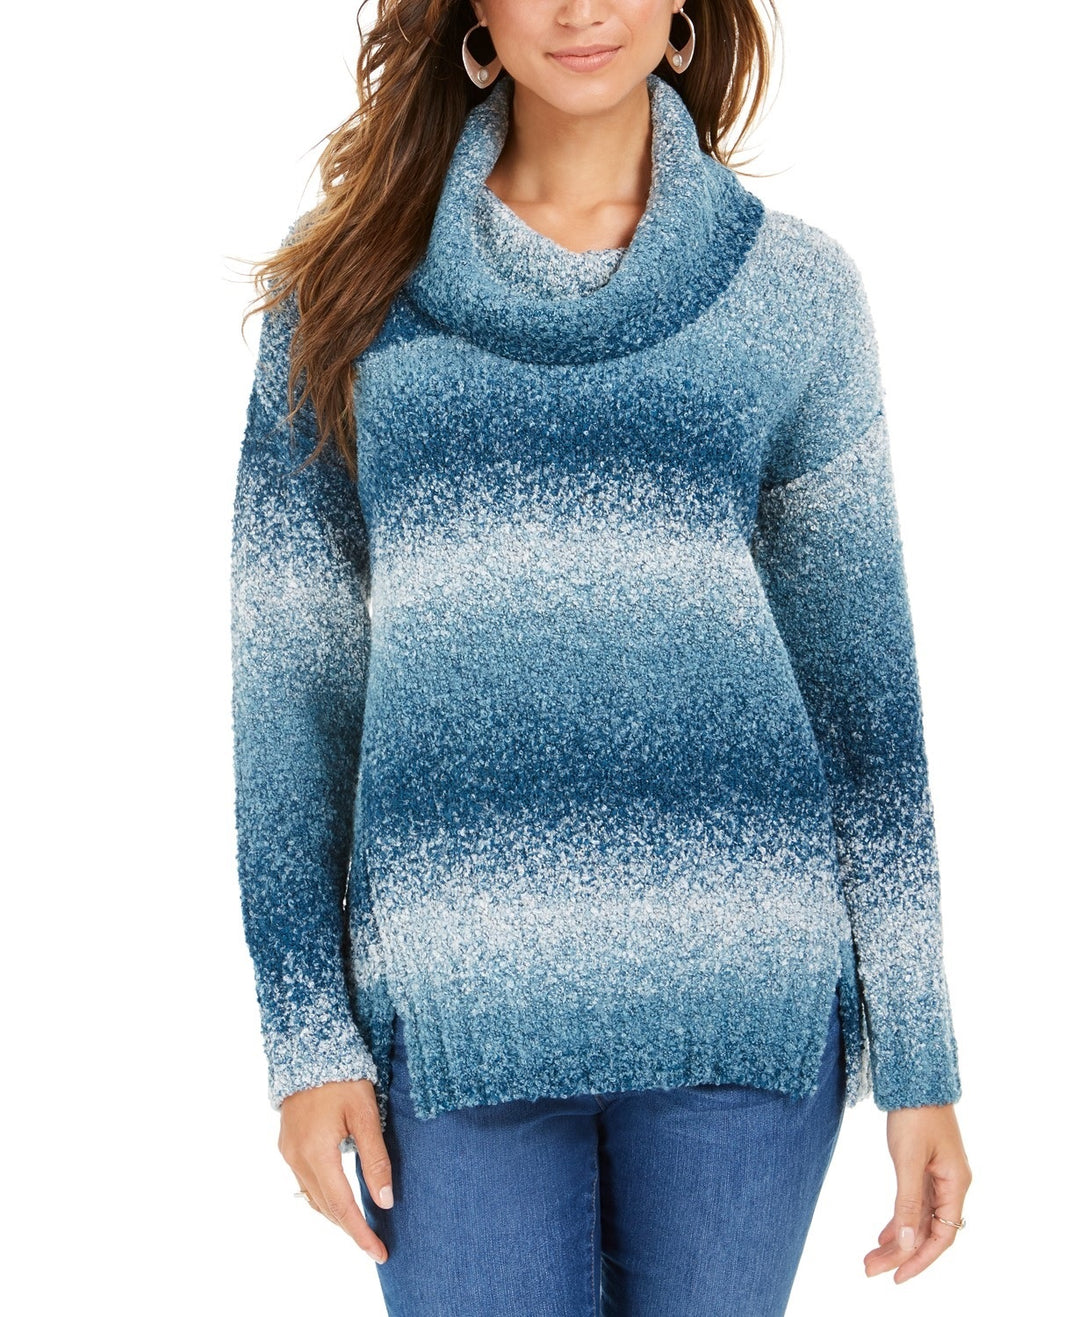 Style & Co Women's Ombre Boucle Sweater  Blue Size Small